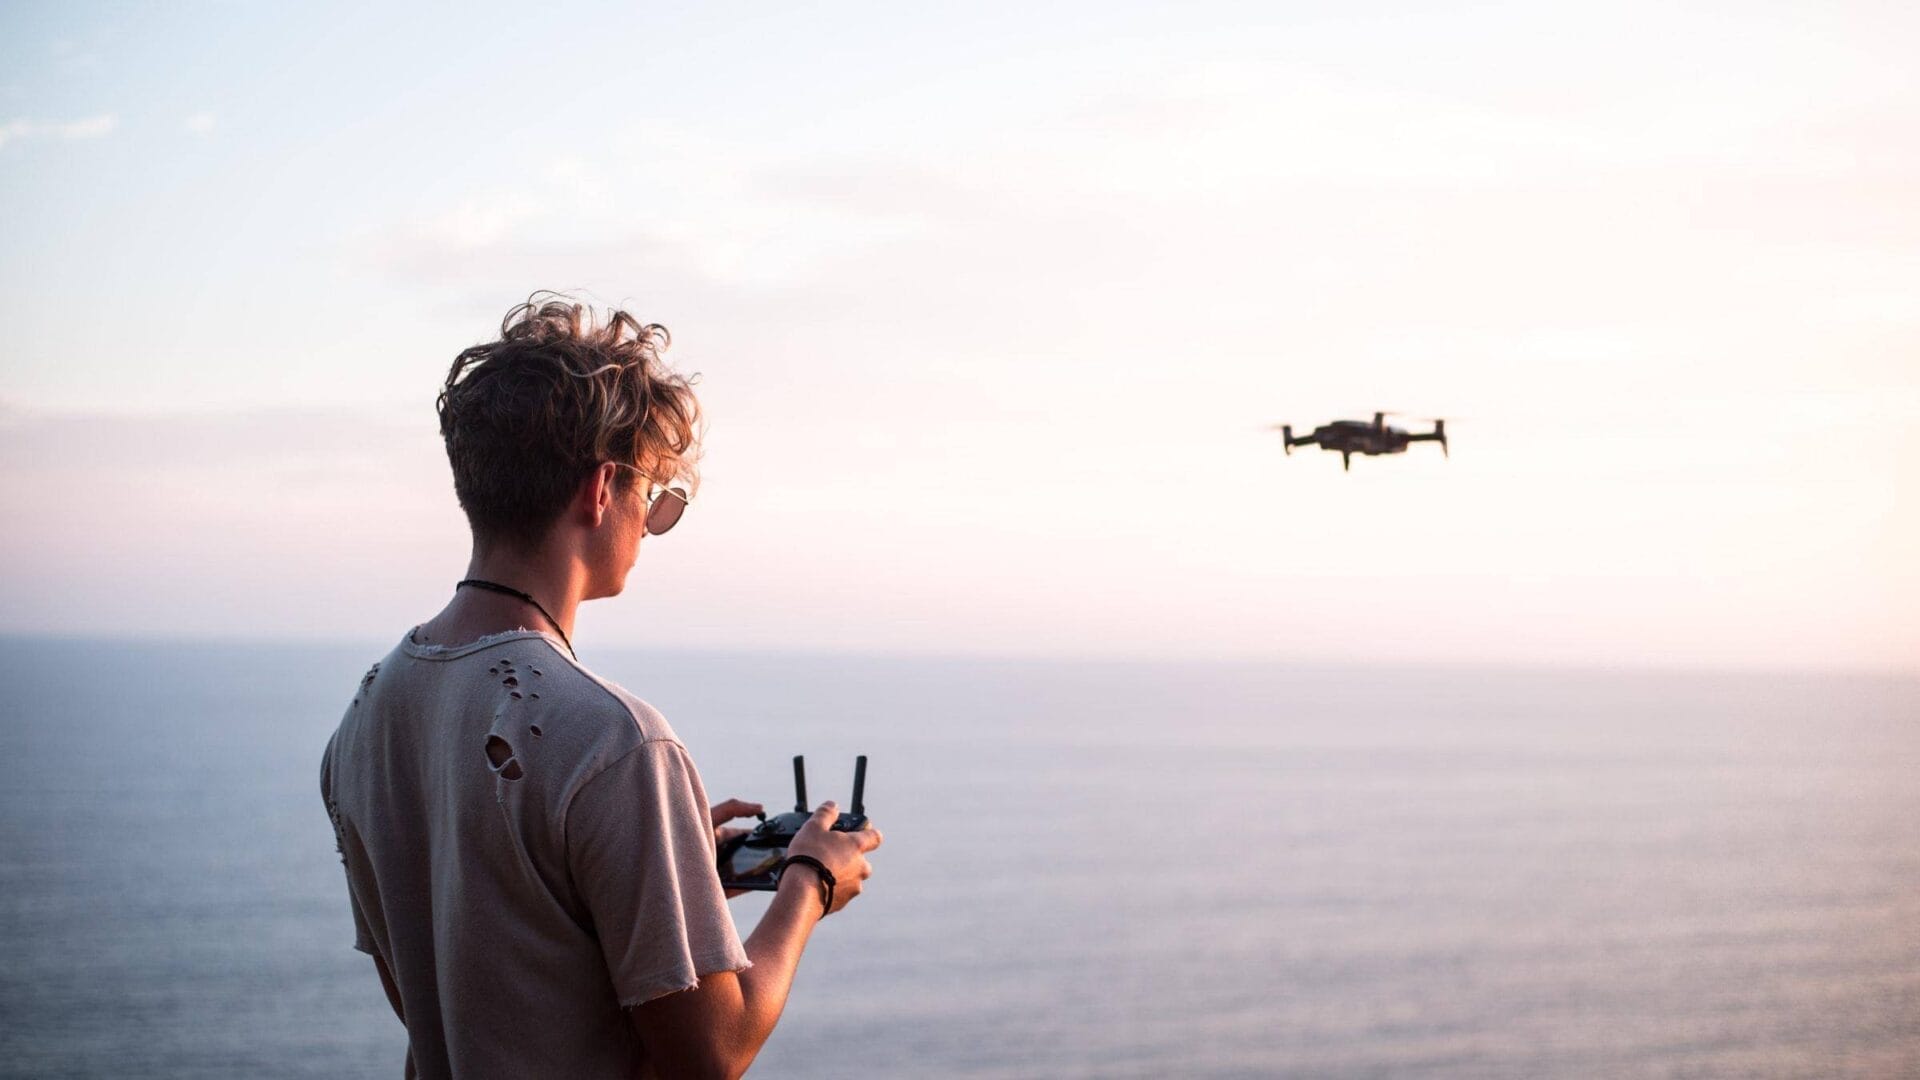         Description: A man is flying a drone over the ocean, capturing stunning aerial footage through AWS.